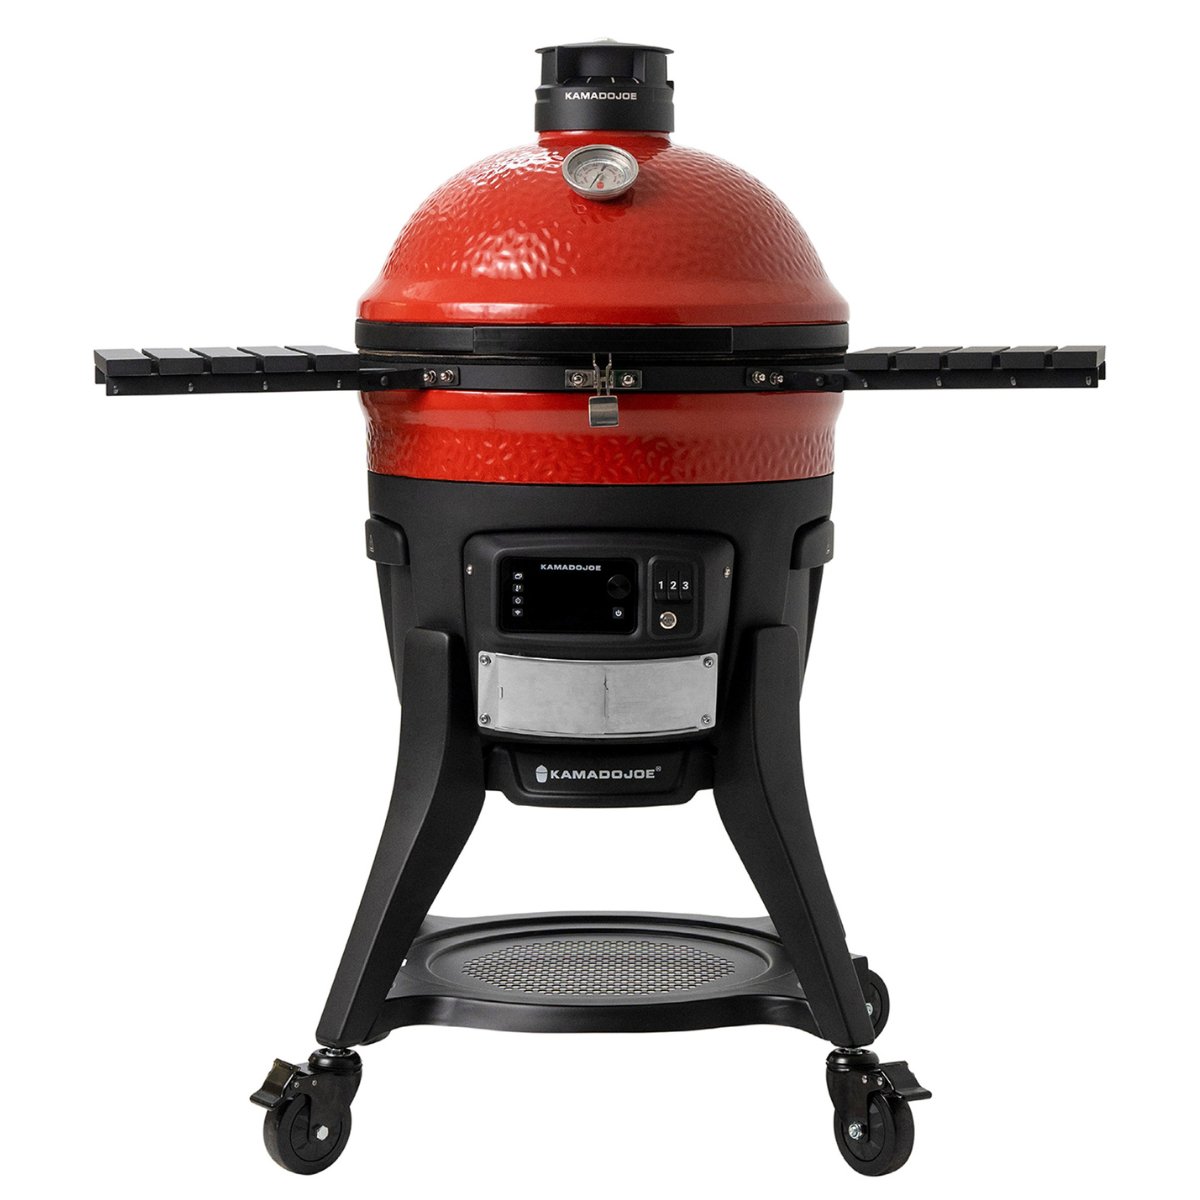 Konnected Joe Digital Charcoal Grill and Smoker - Kitchen In The Garden